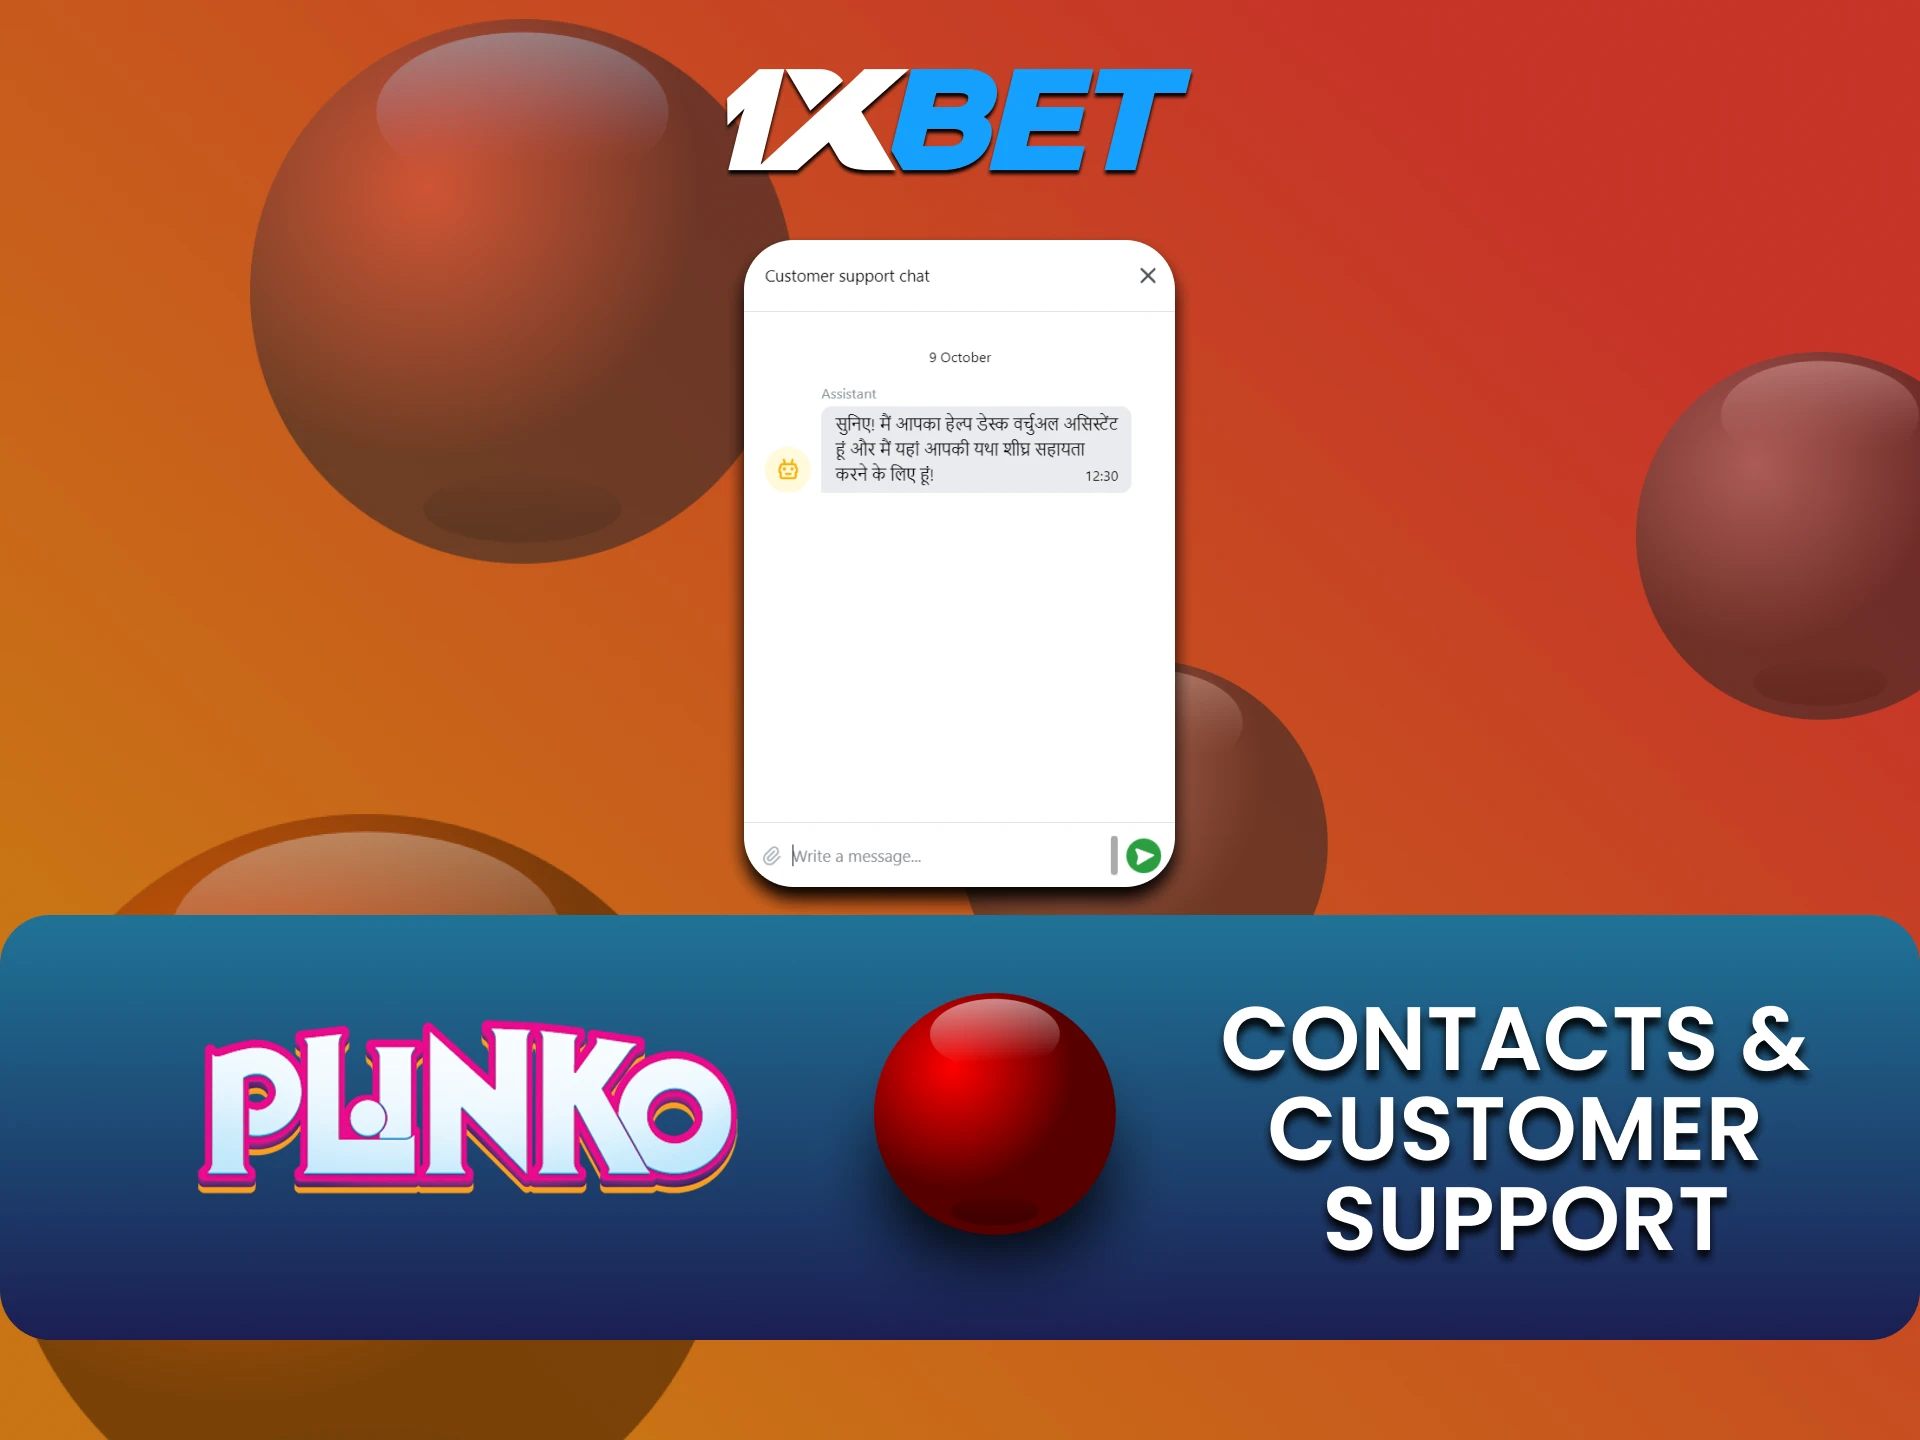 The 1xbet team is always in touch with its users.